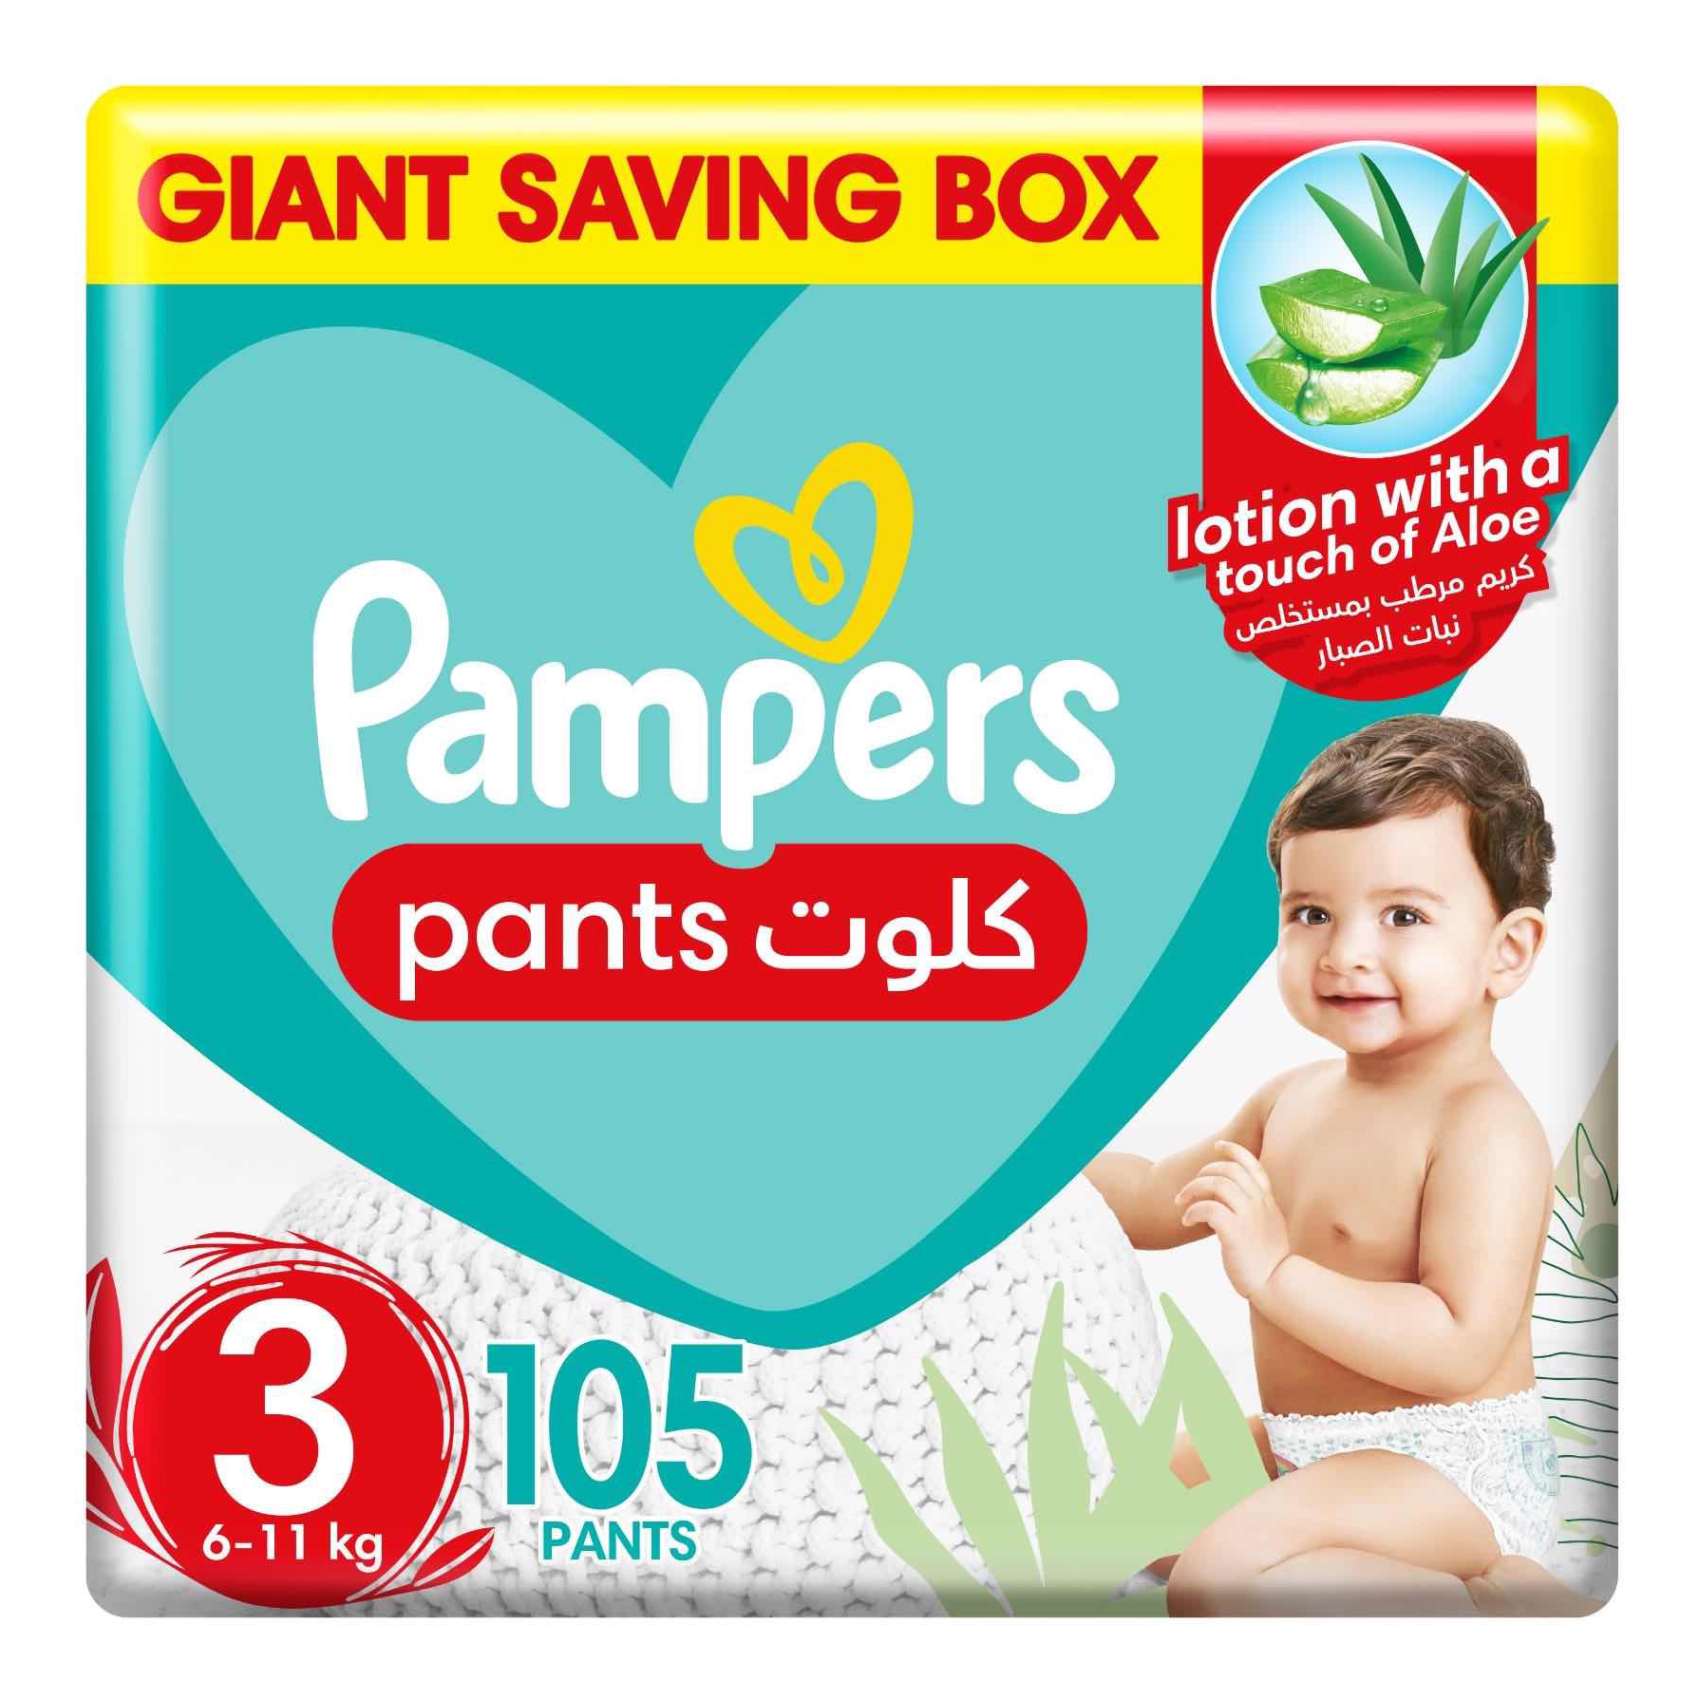 Pampers BabyDry Pants with Aloe Vera Lotion Size 3 (6-11kg) 105 Diapers